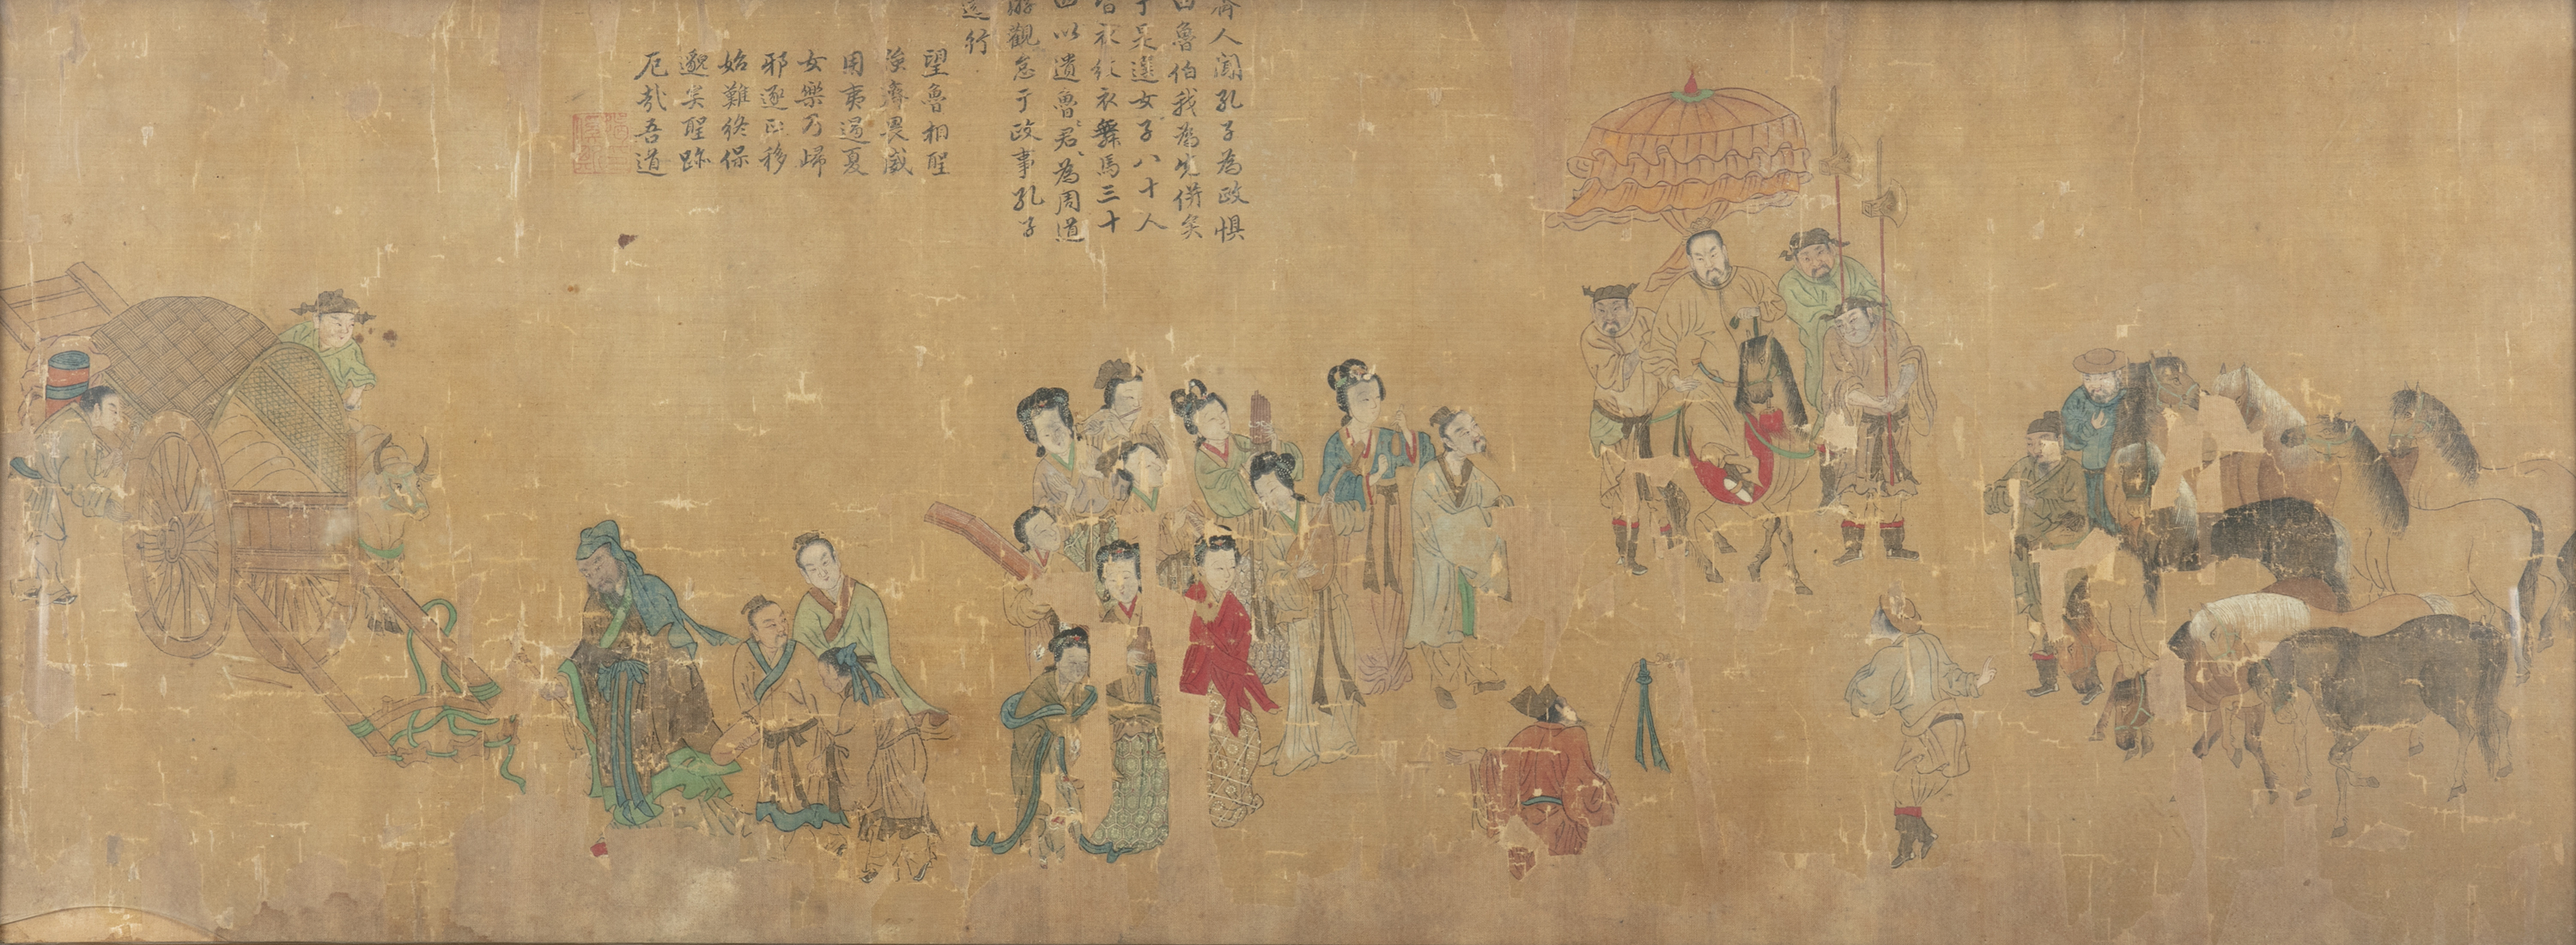 CHINESE SCHOOL, SIGNATURE OF JIE XISI 揭傒斯 (1274-1344) A procession with numerous dignitaries Ink and - Image 4 of 10